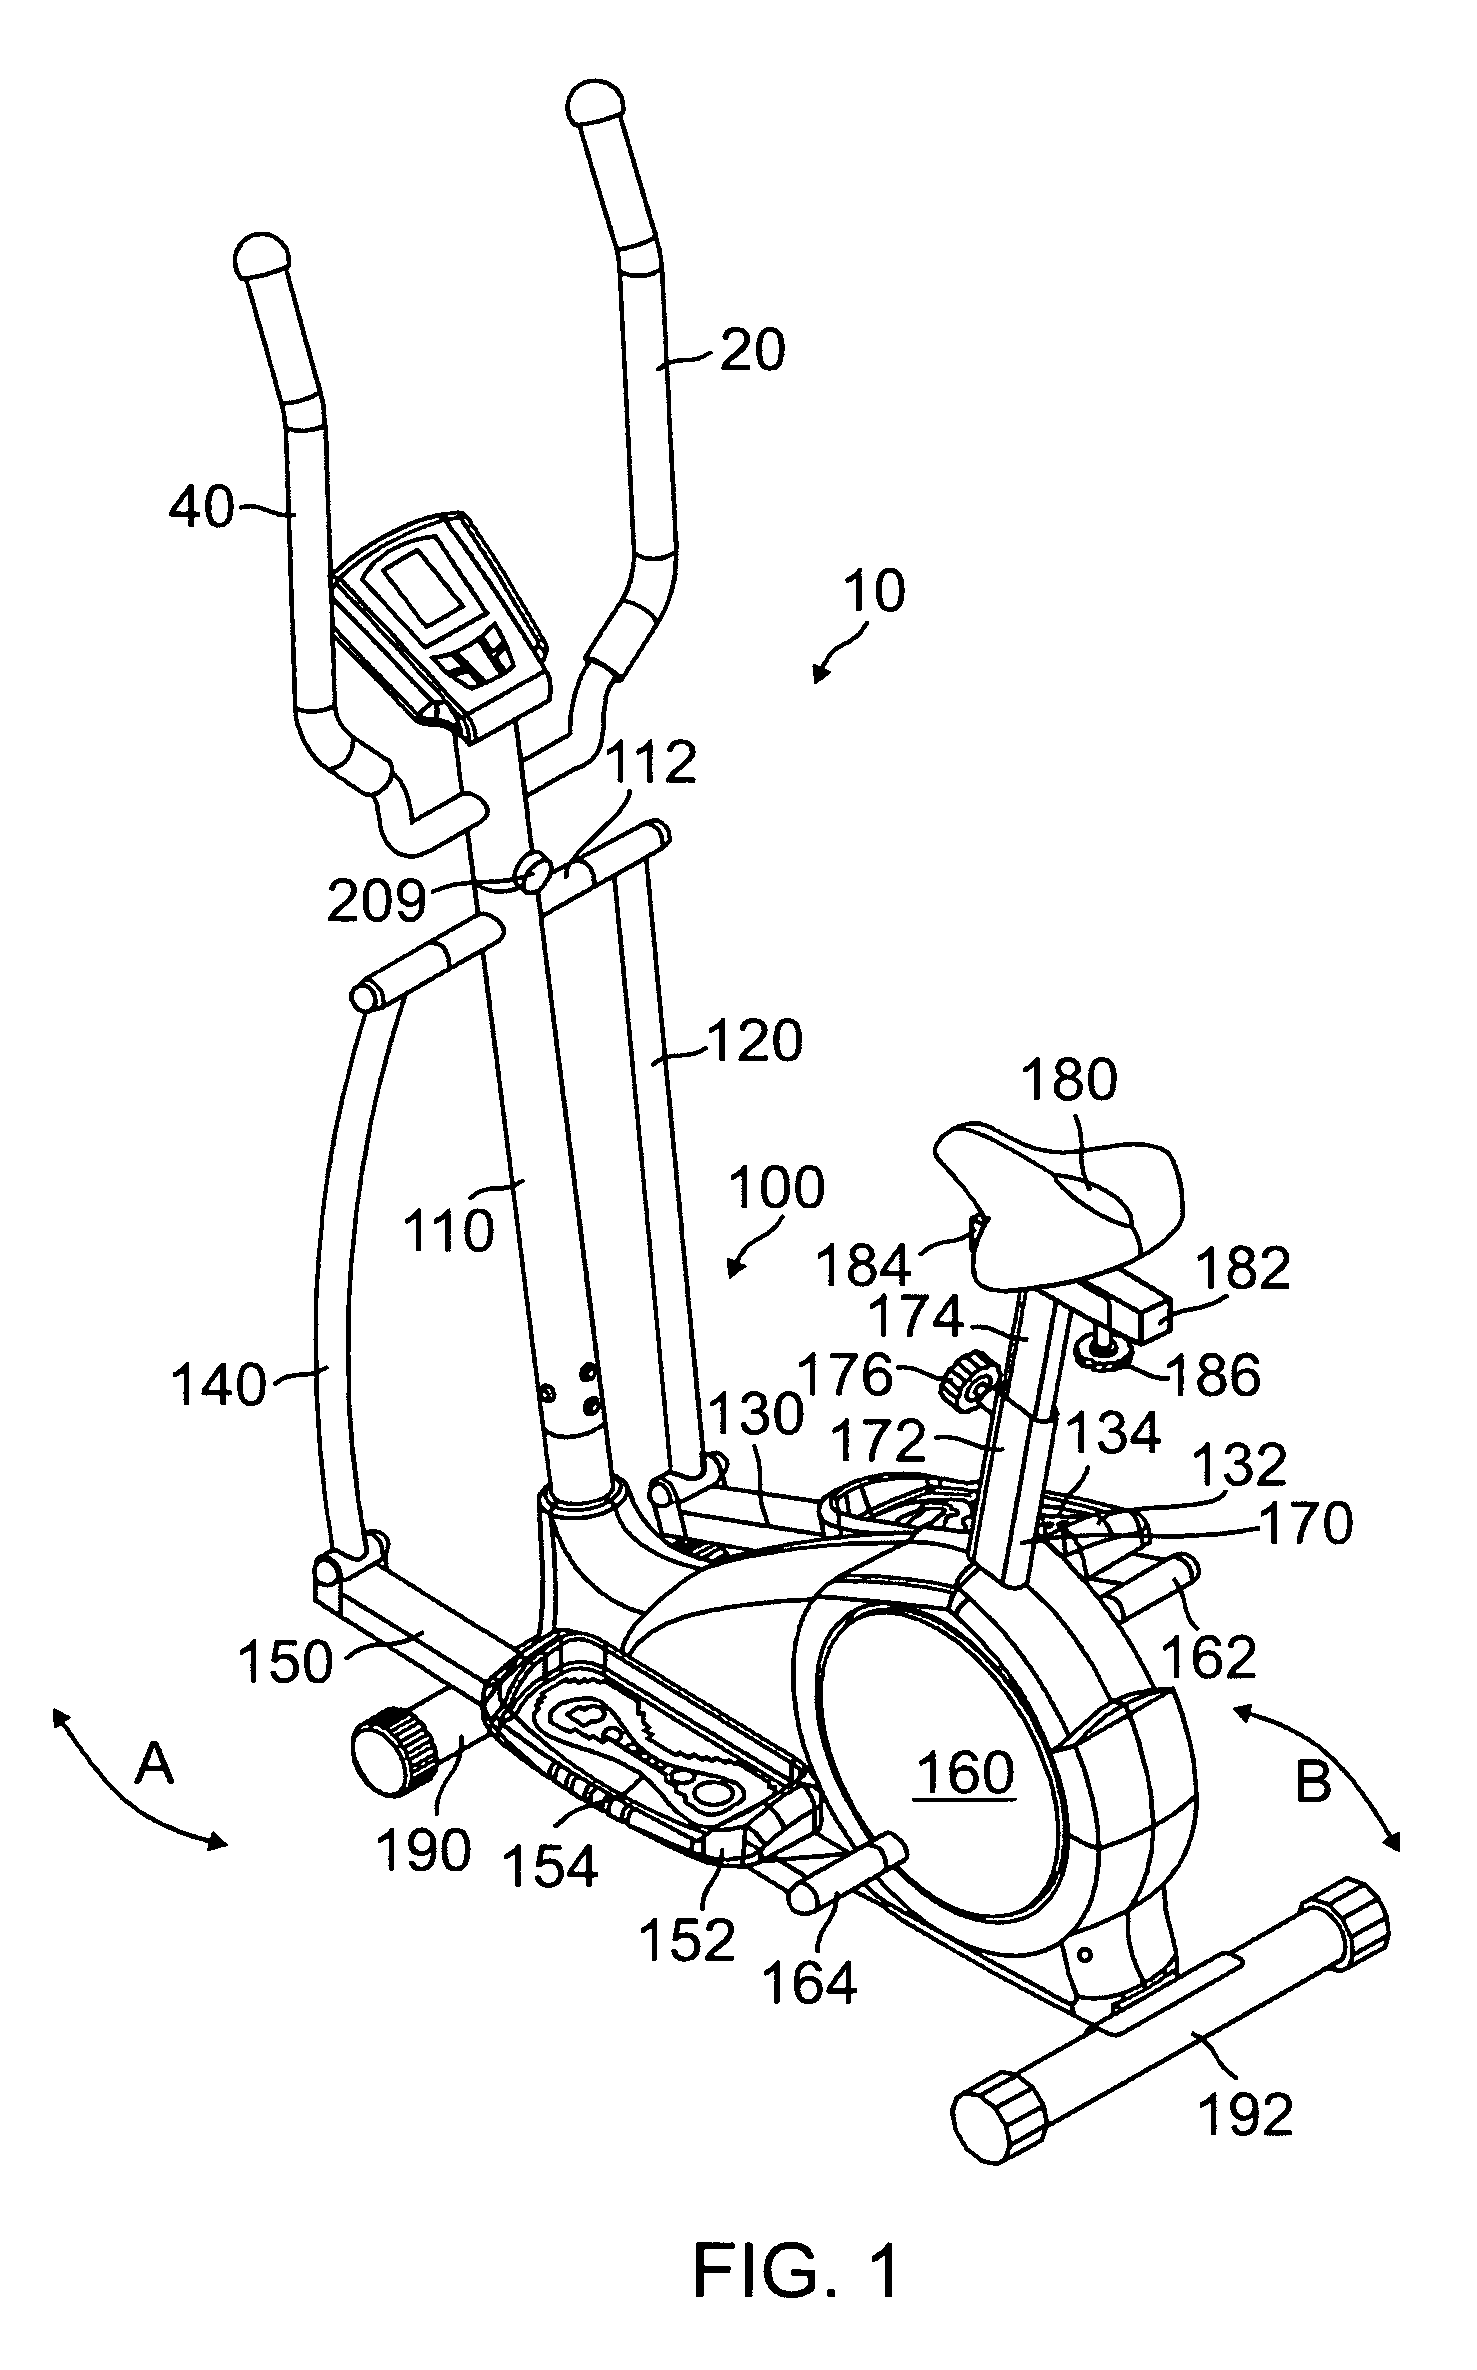 Abdominal swiveling exercise machine combined with an elliptical trainer exercise machine, or skate simulation trainer, or exercise bicycle or recumbent bicycle